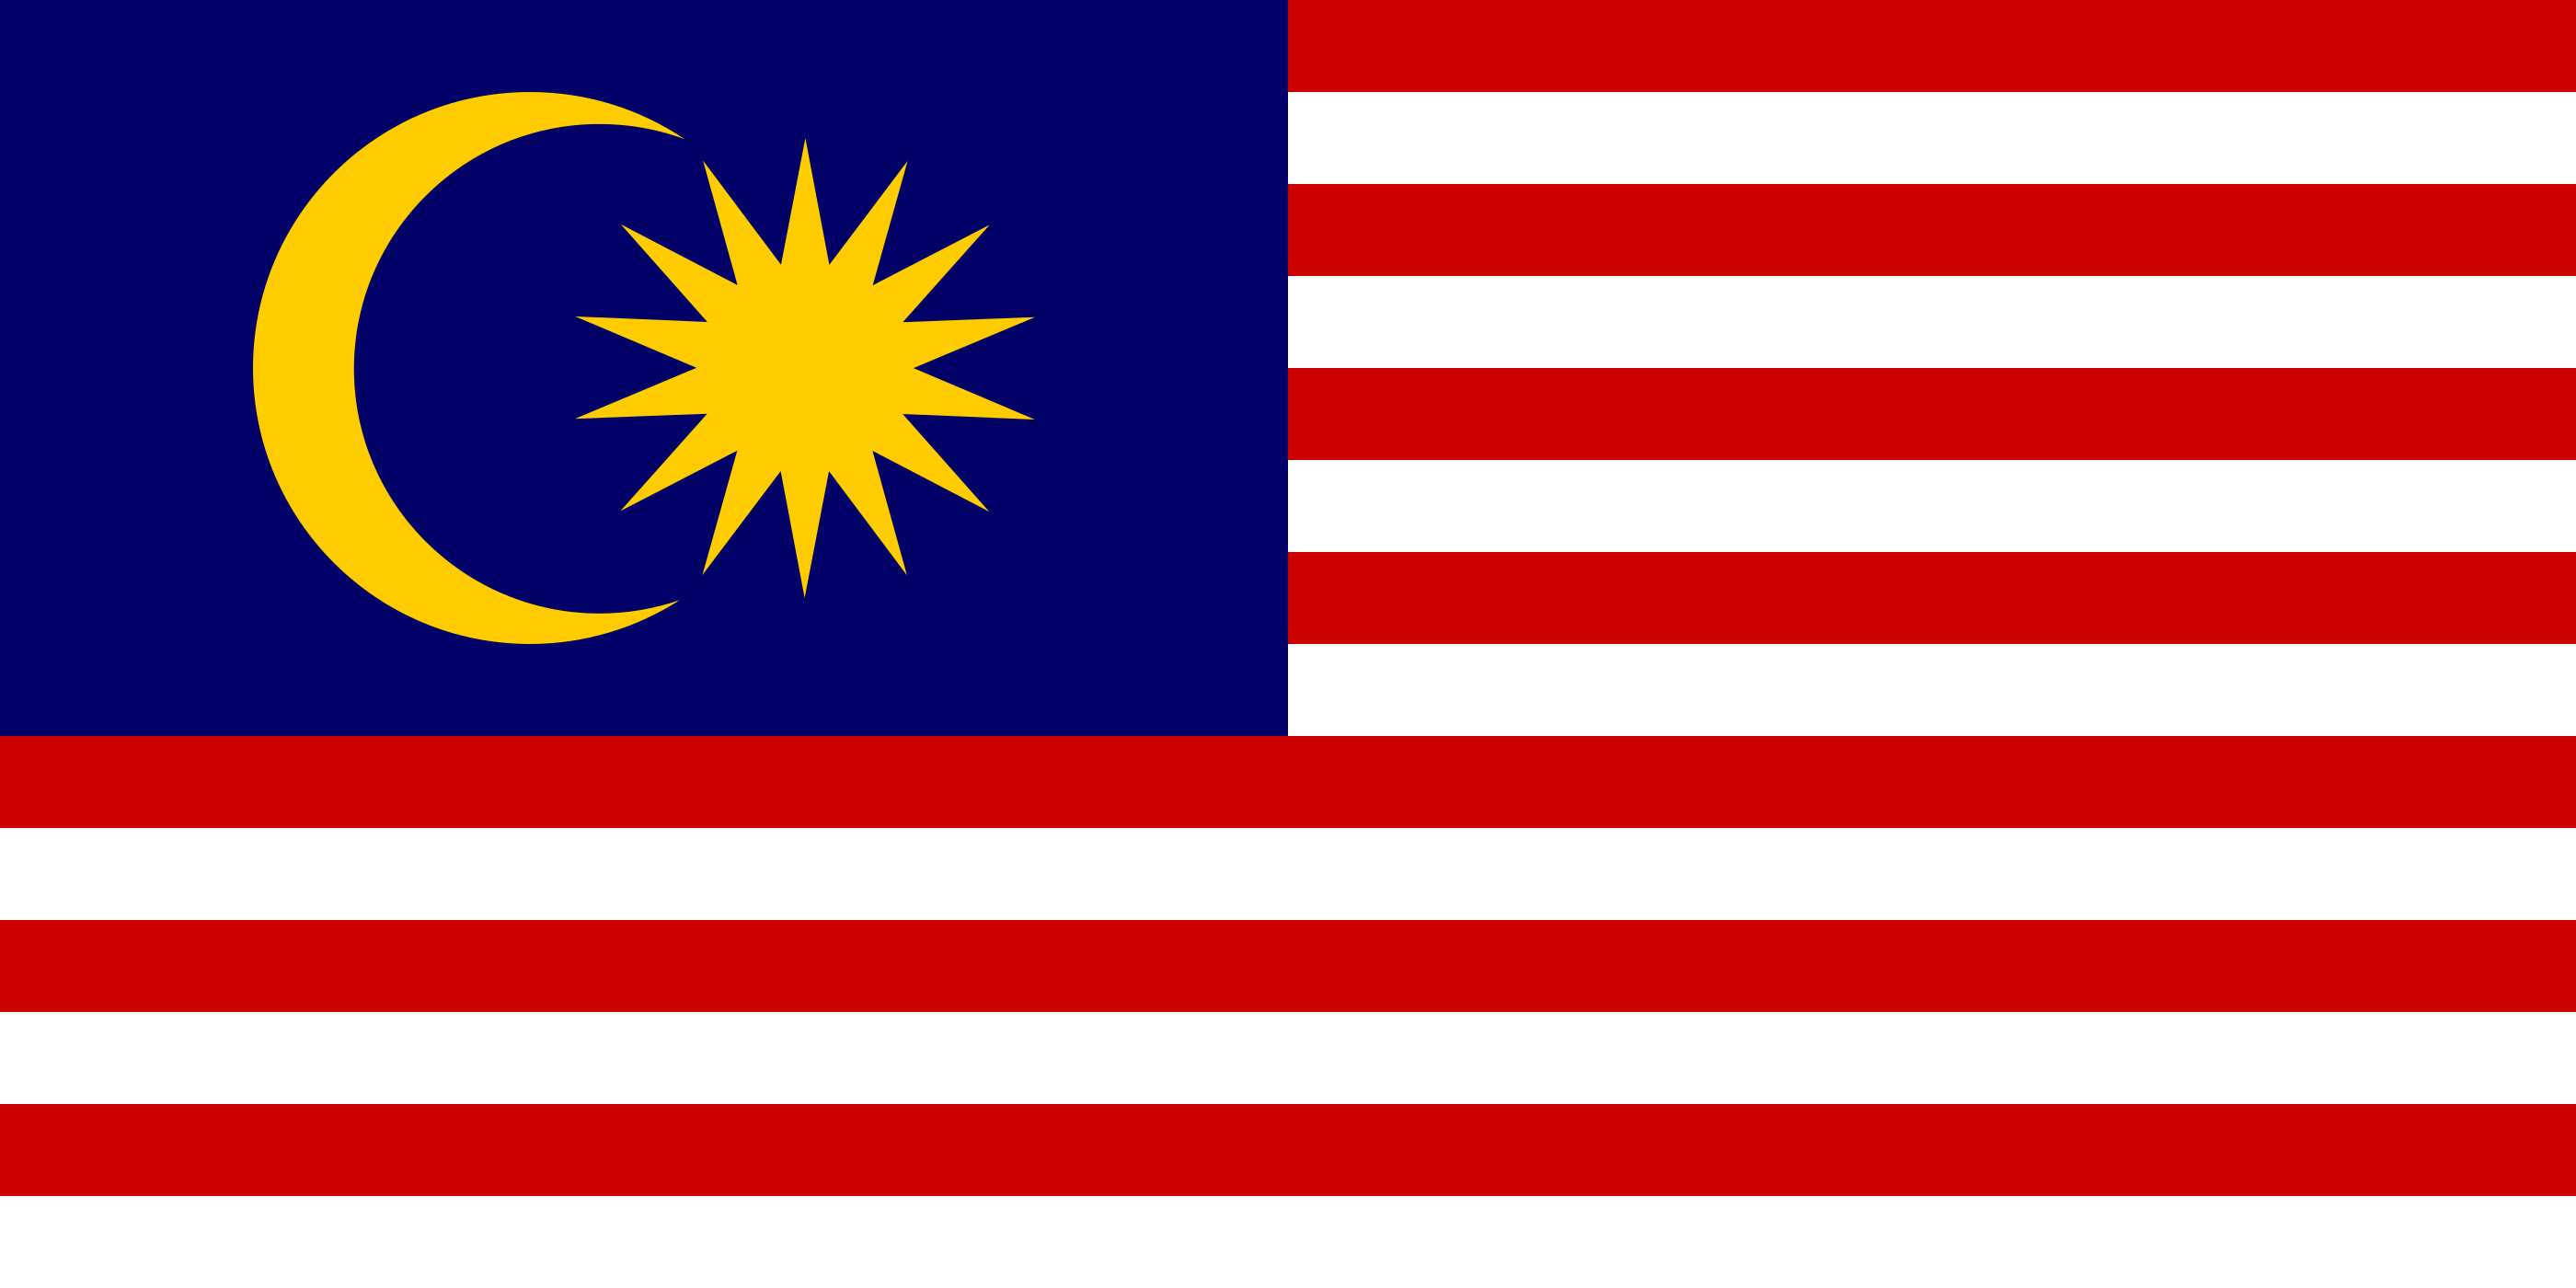 https://upload.wikimedia.org/wikipedia/commons/thumb/6/66/Flag_of_Malaysia.svg/2800px-Flag_of_Malaysia.svg.png